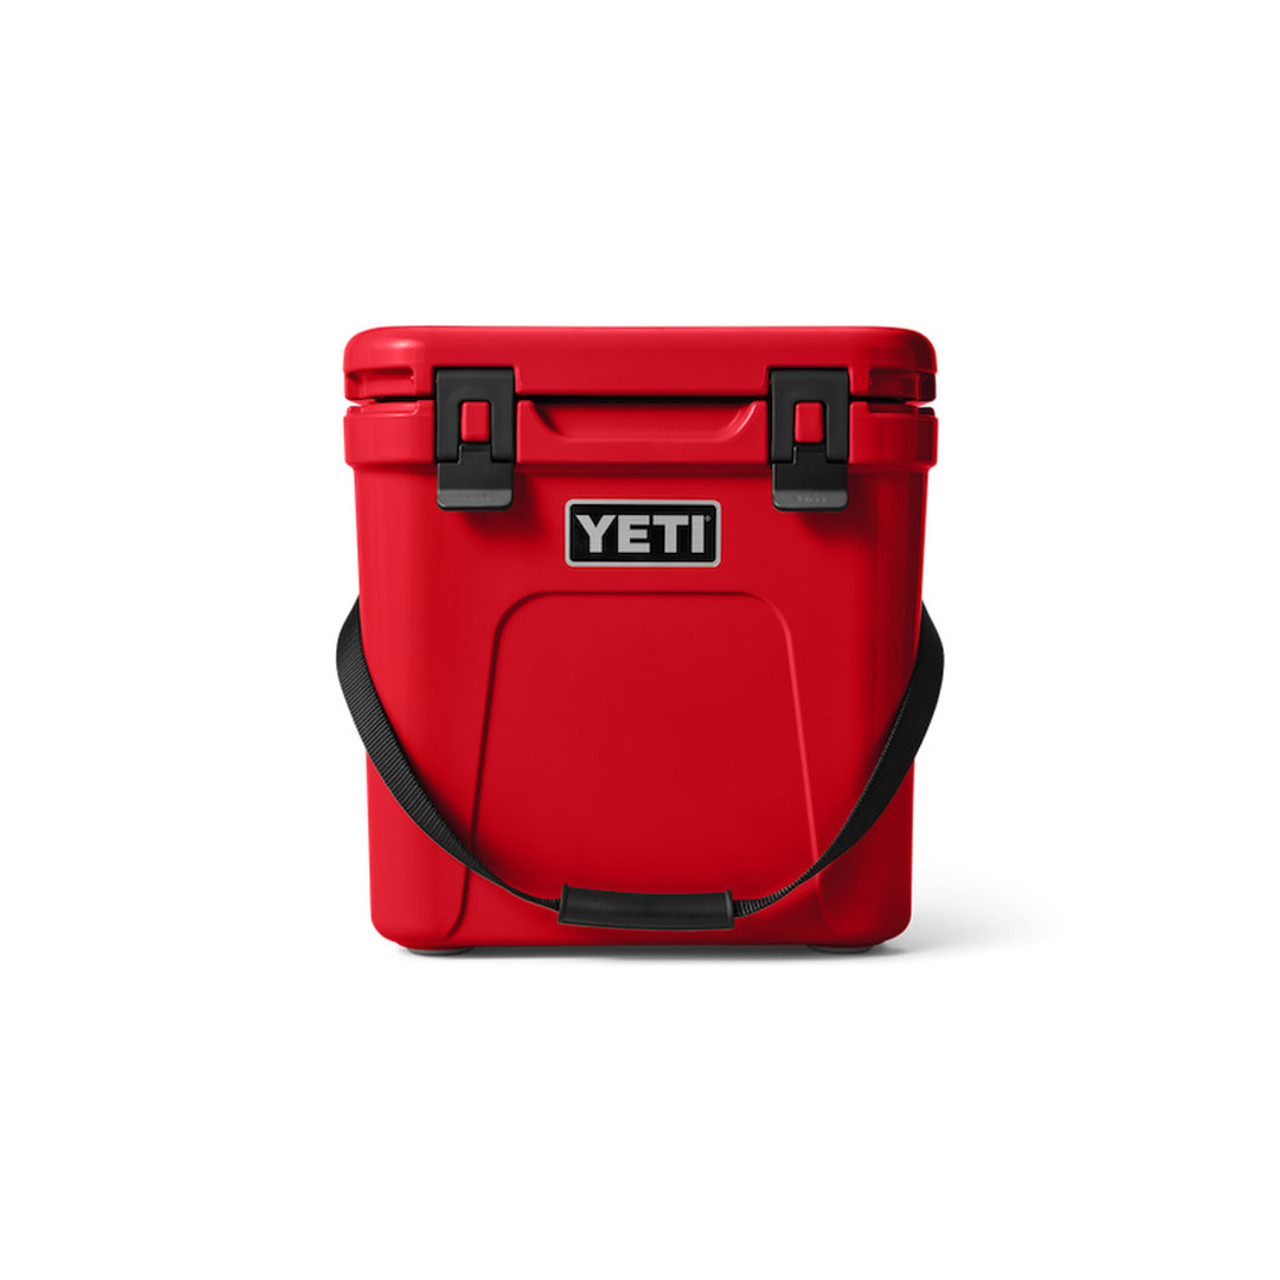 YETI Rescue Red Color Collection